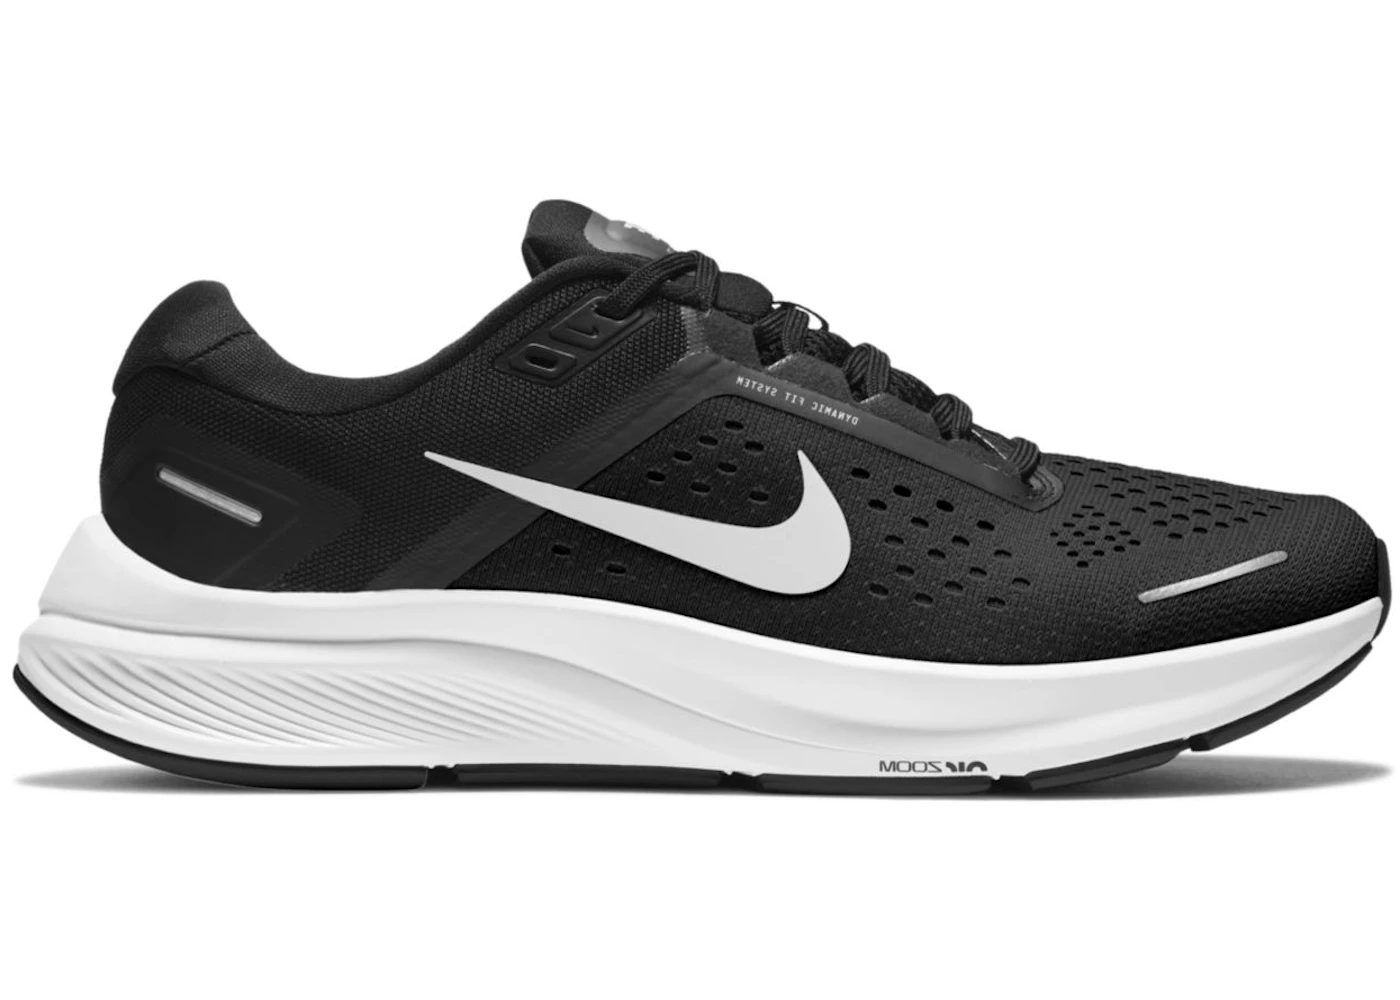 Nike Air Zoom Structure 23 Black White (Women's) - CZ6721-001 - US